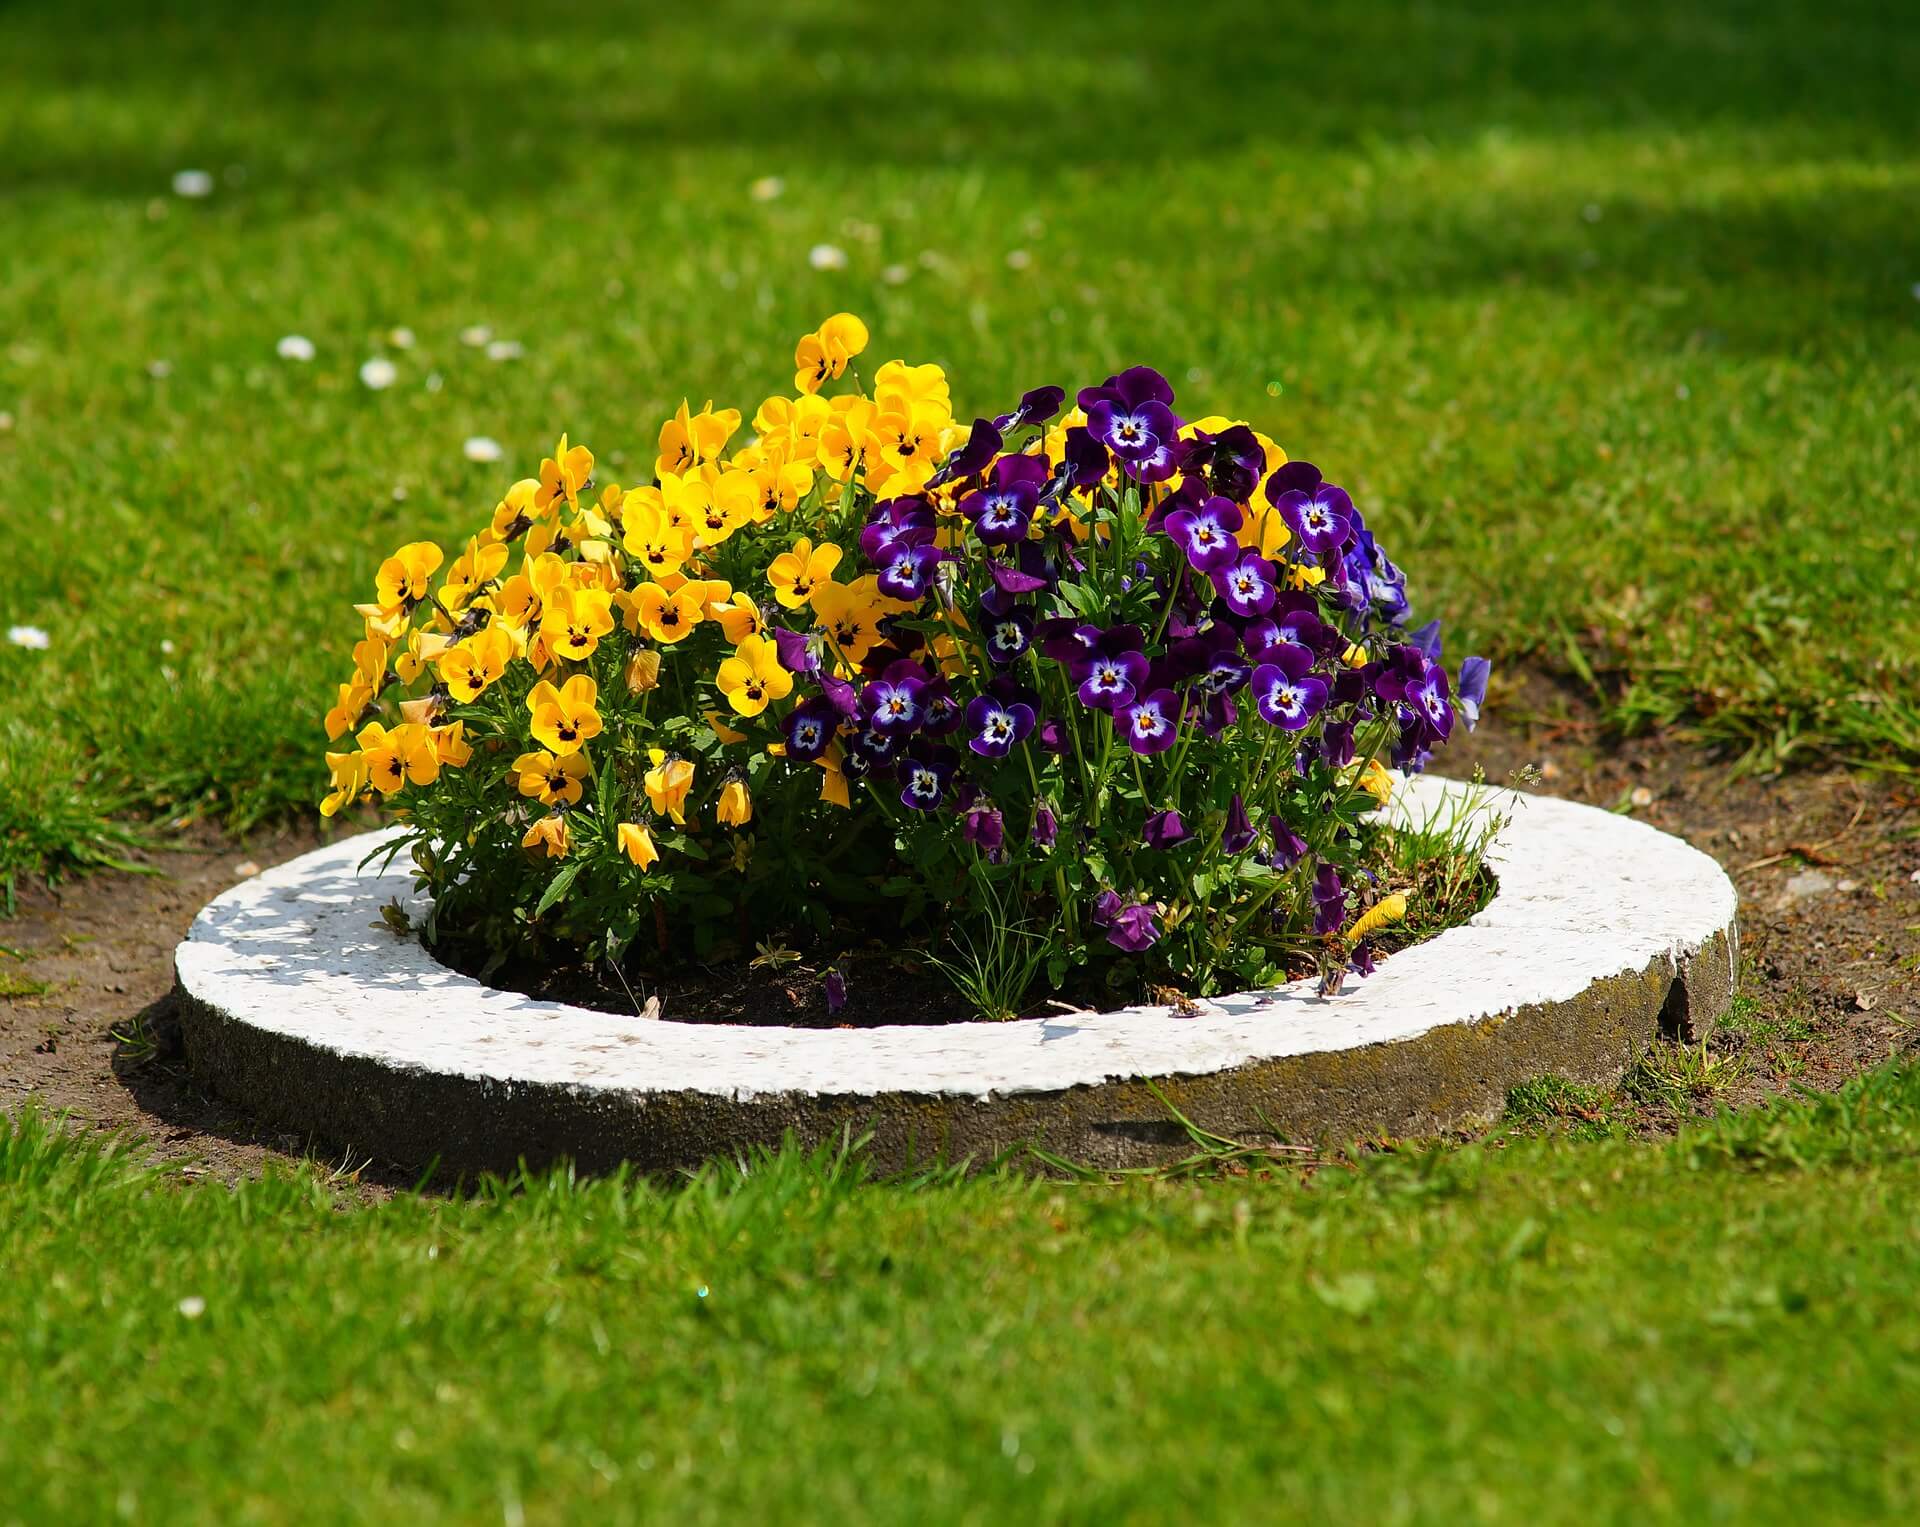 Make It Special with a Colorful Round Flower Bed